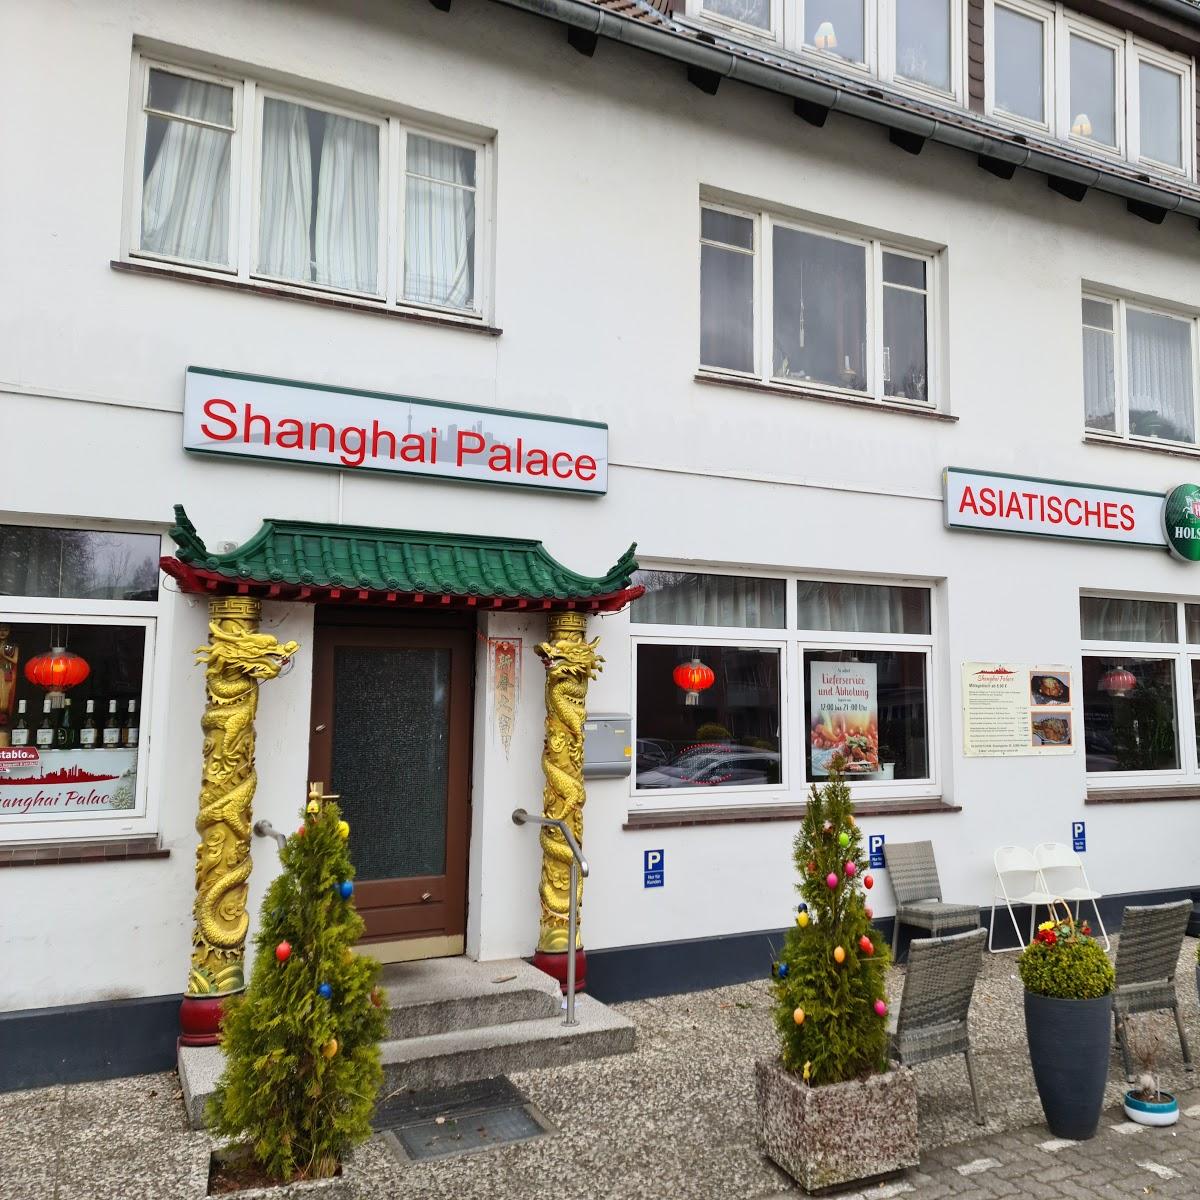 Restaurant "Shanghai Palace" in  Wedel